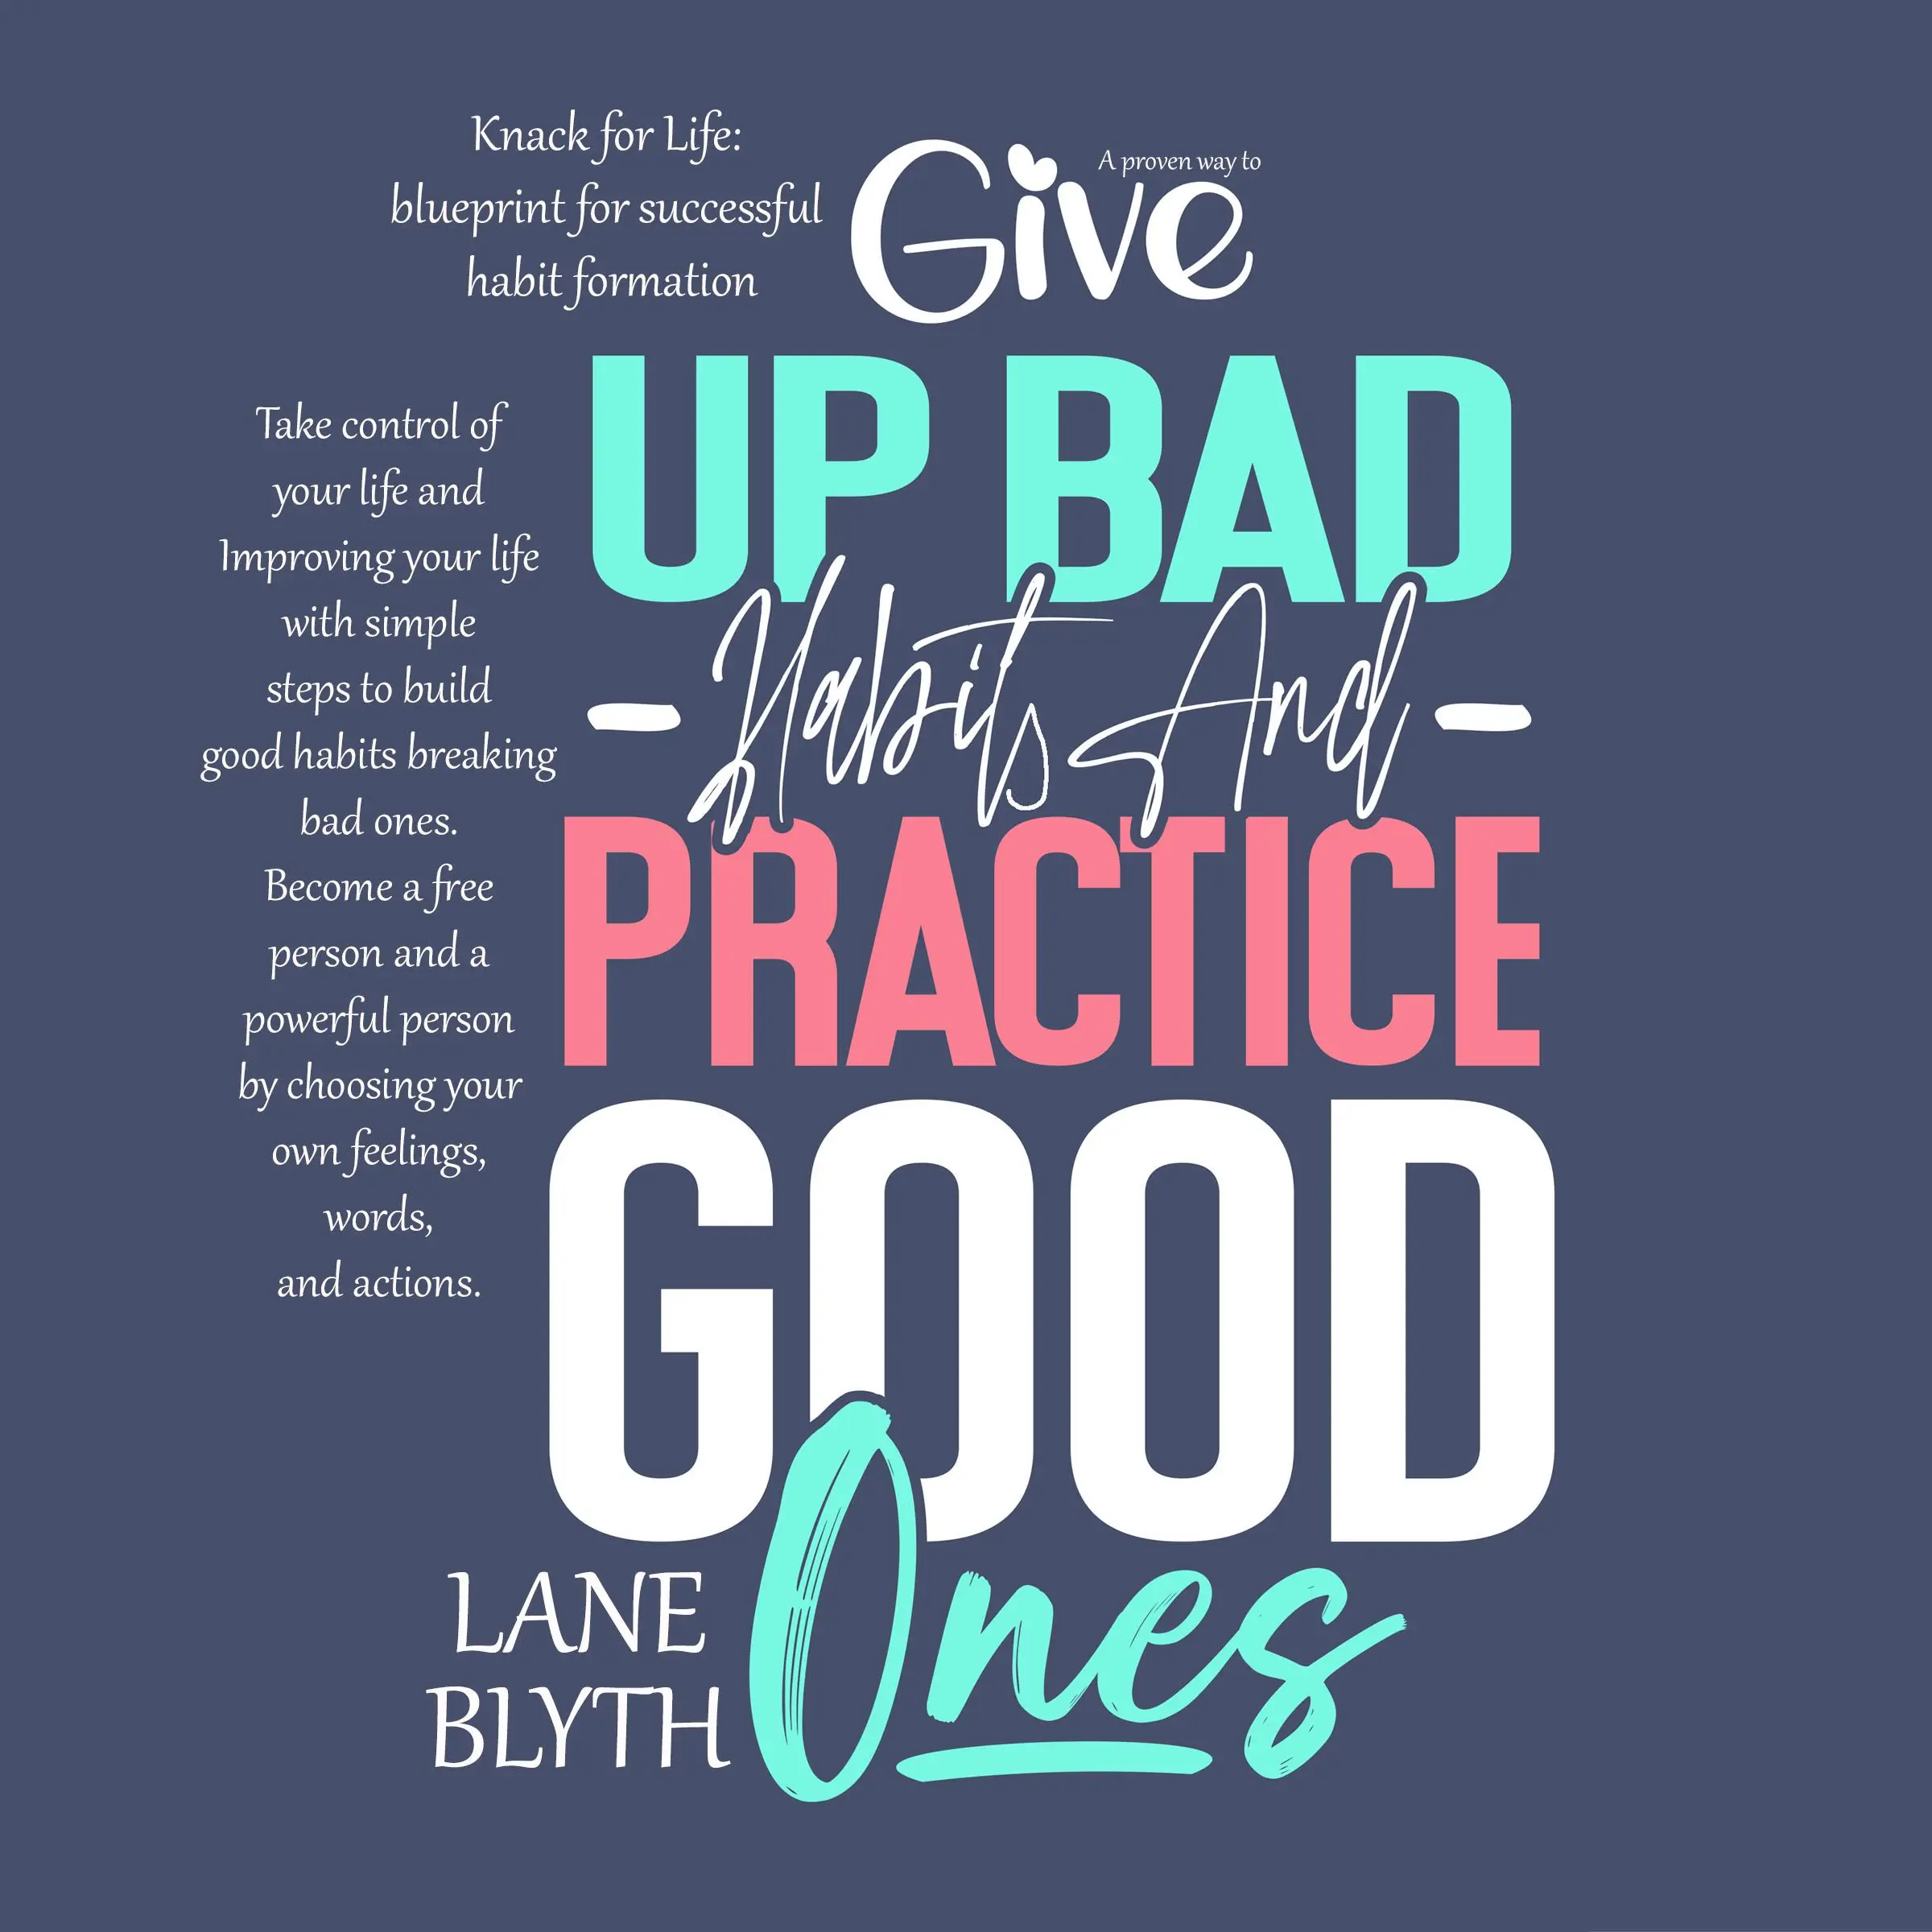 Knack for Life: blueprint for successful habit formation. A Proven way to give up bad habits and practice good ones Audiobook by Lane Blyth